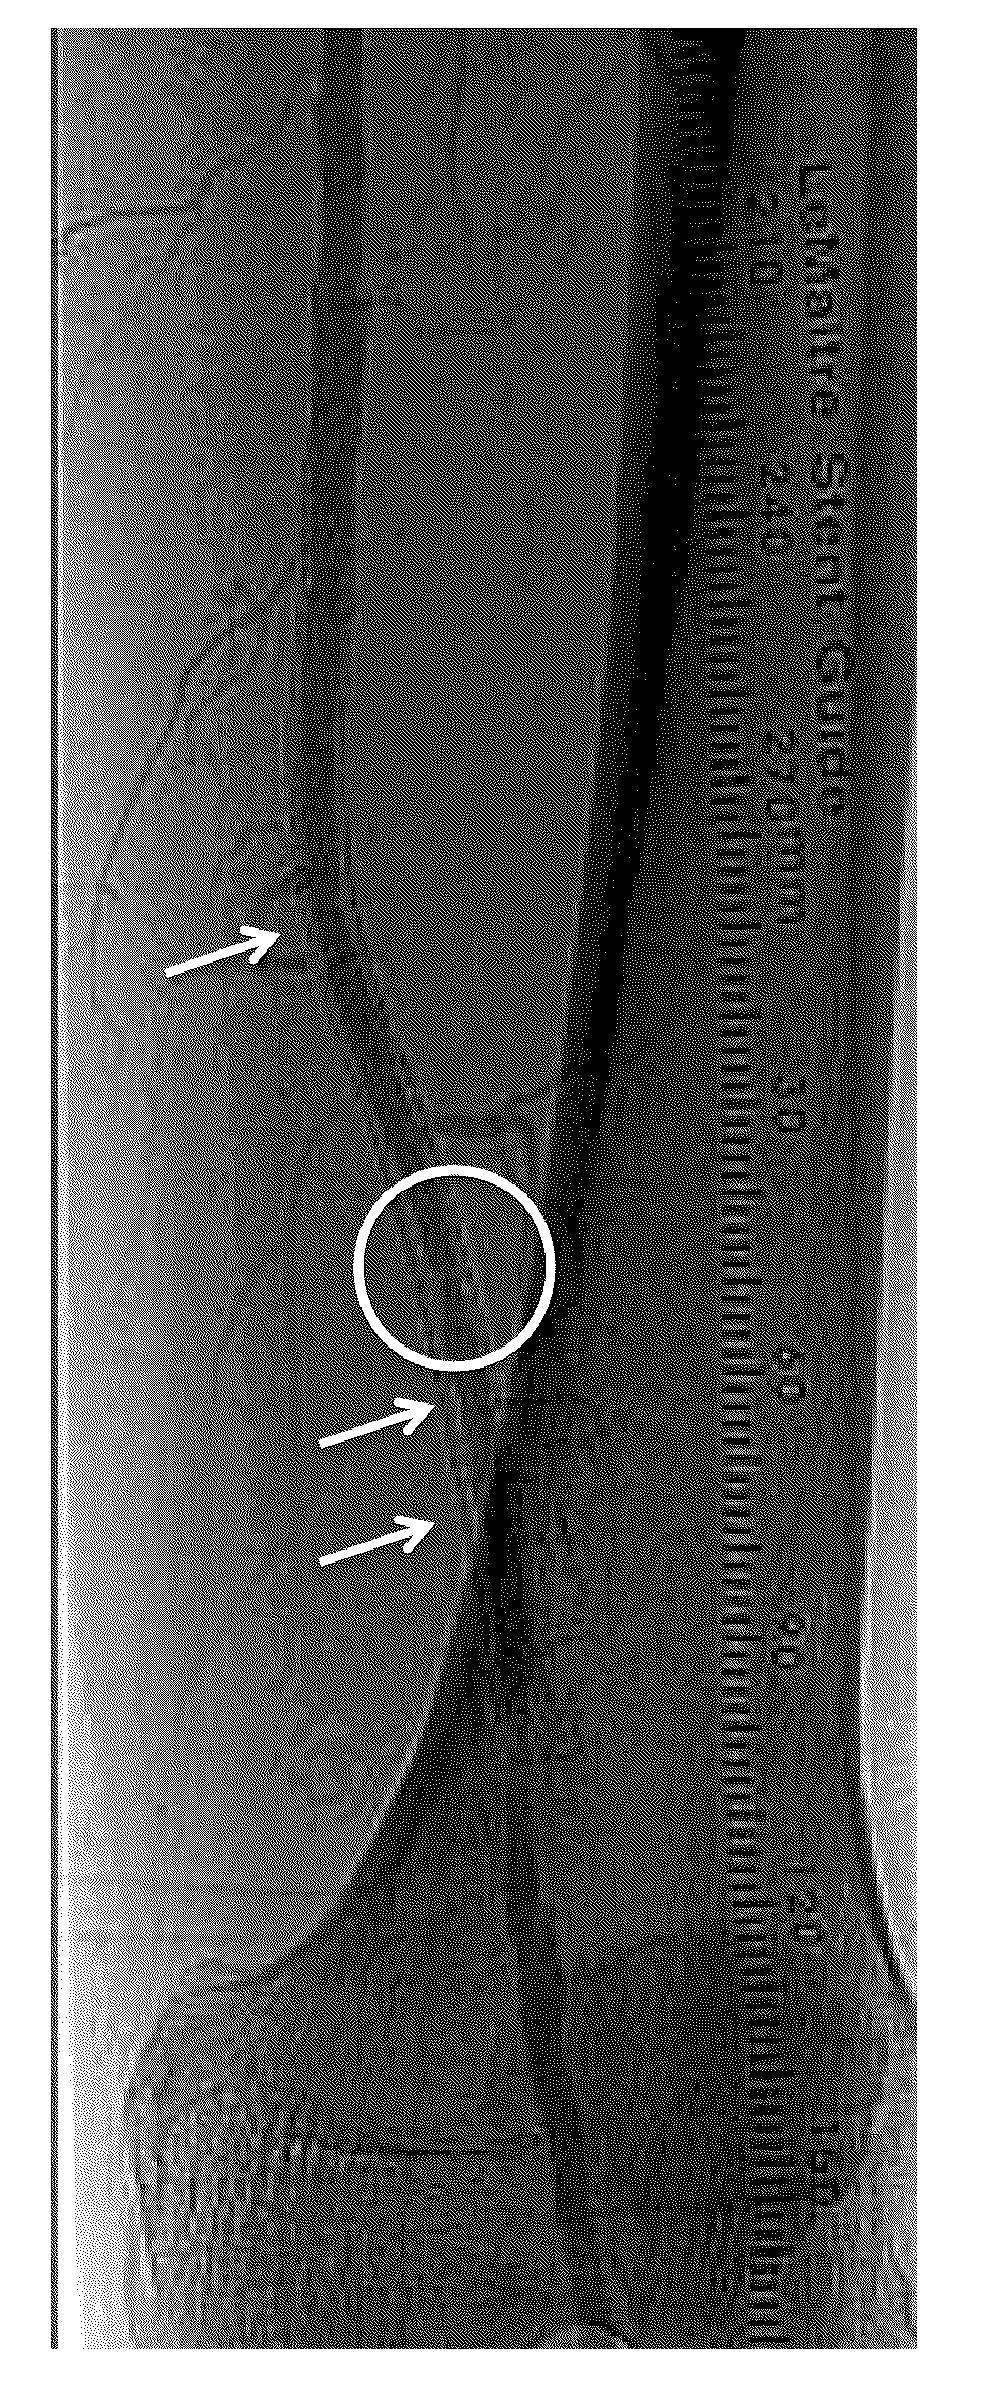 Apparatus and method for treatment of in-stent restenosis